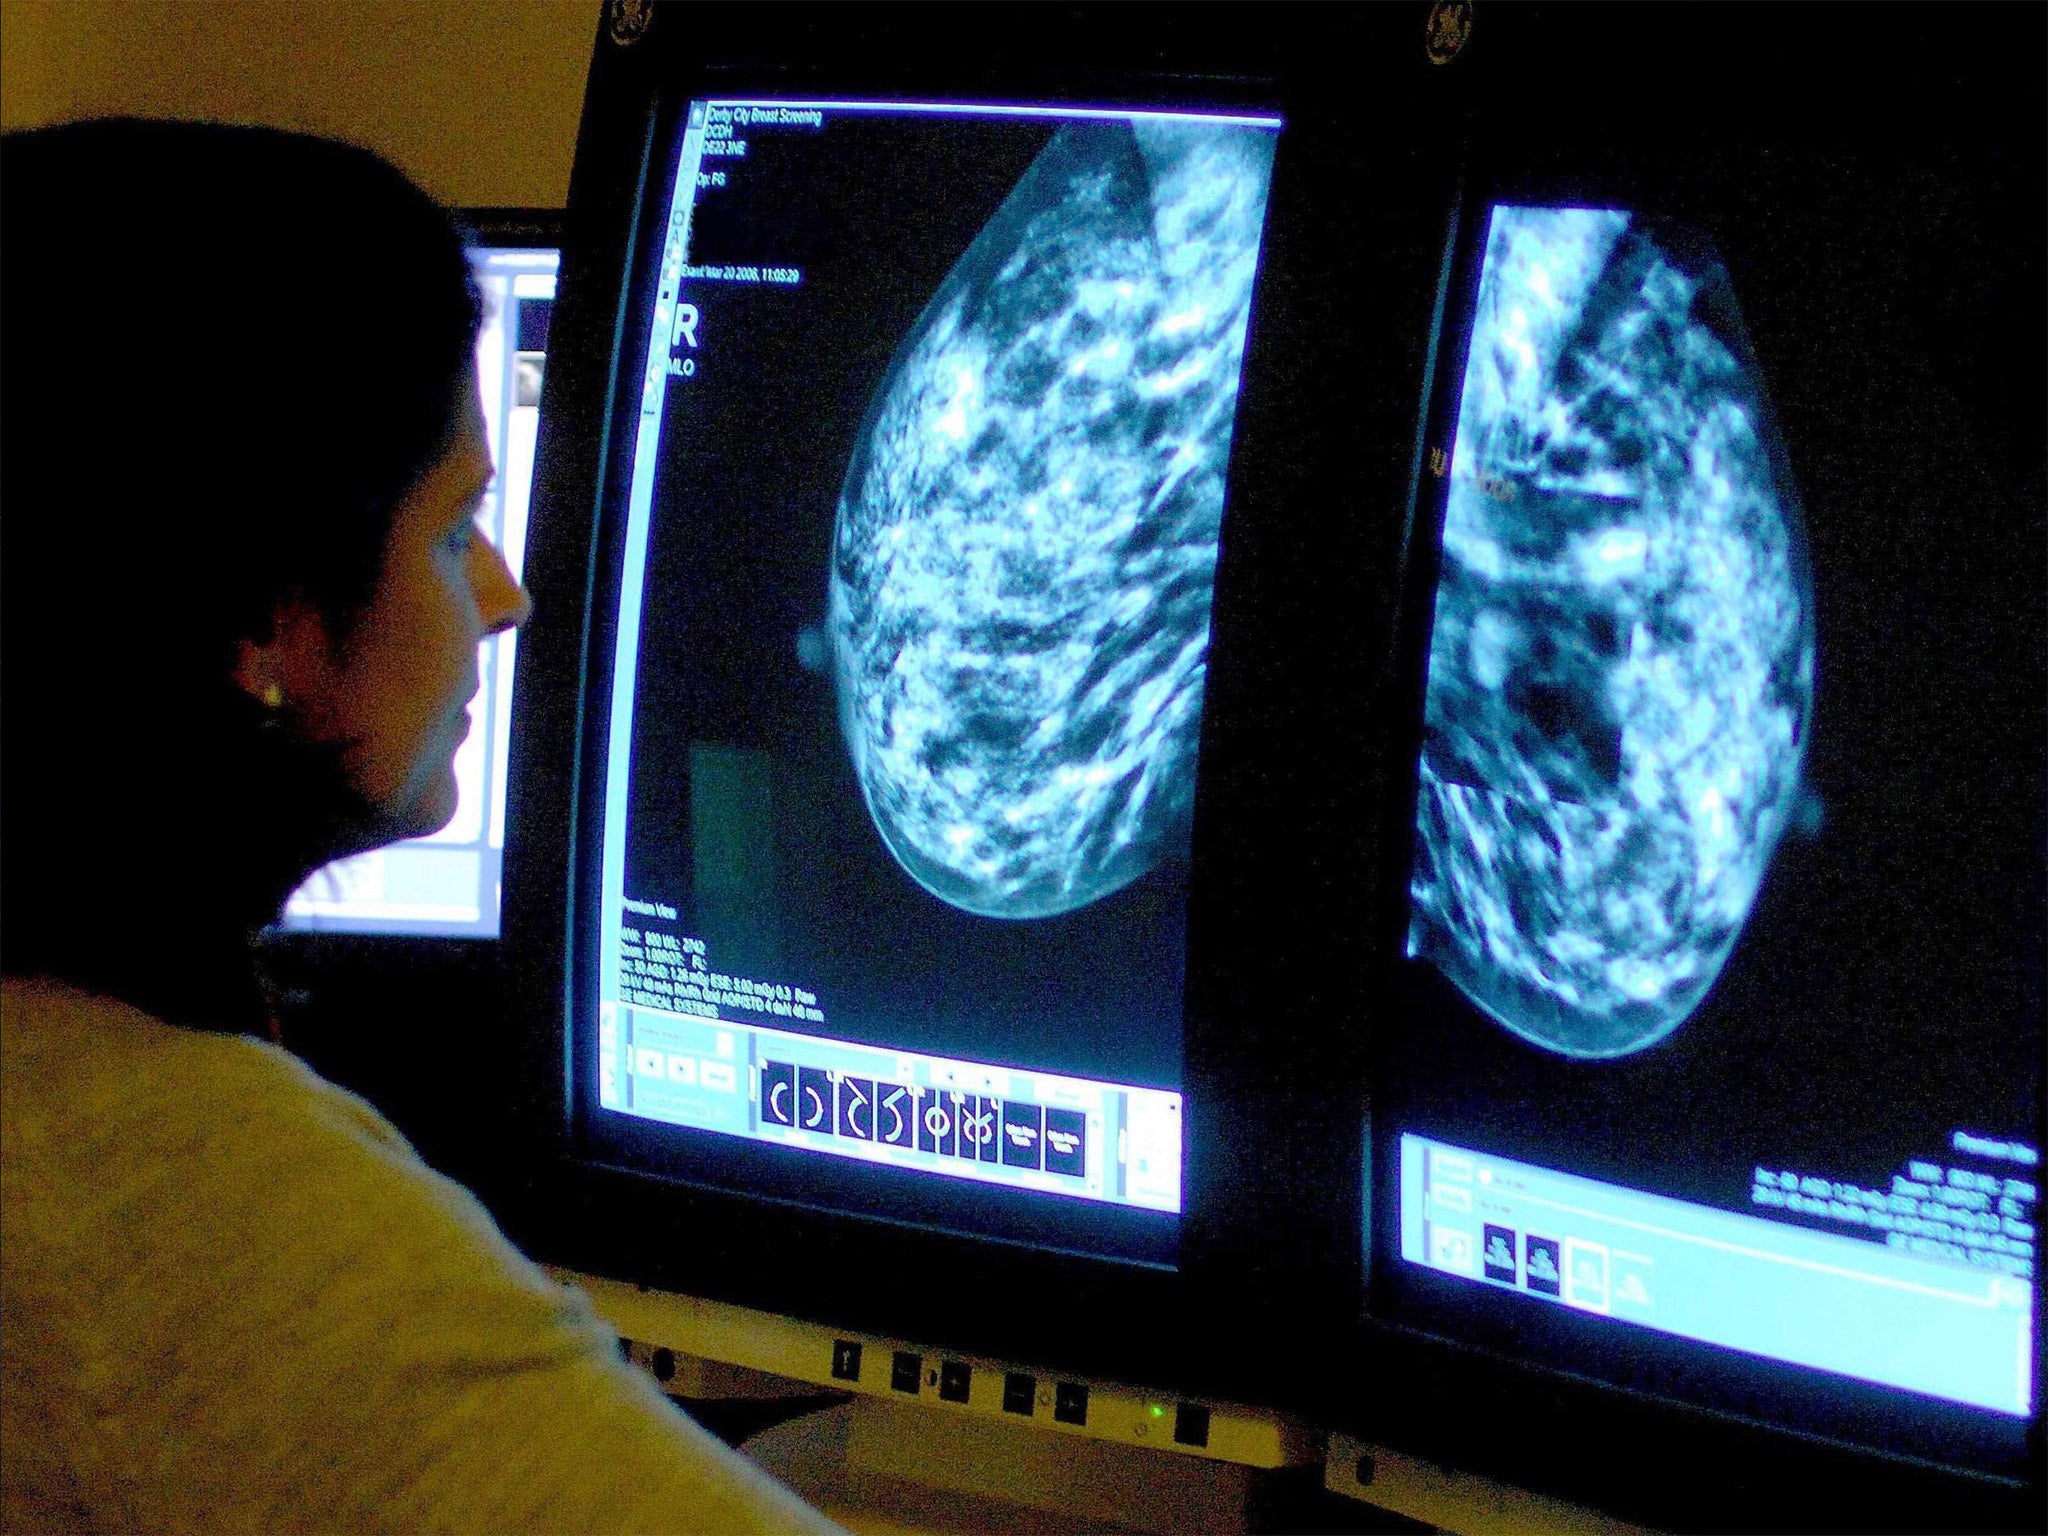 The study found that the numbers of breast cancer patients having double mastectomies increased from just two per cent in 1998 to 12.3 per cent in 2011